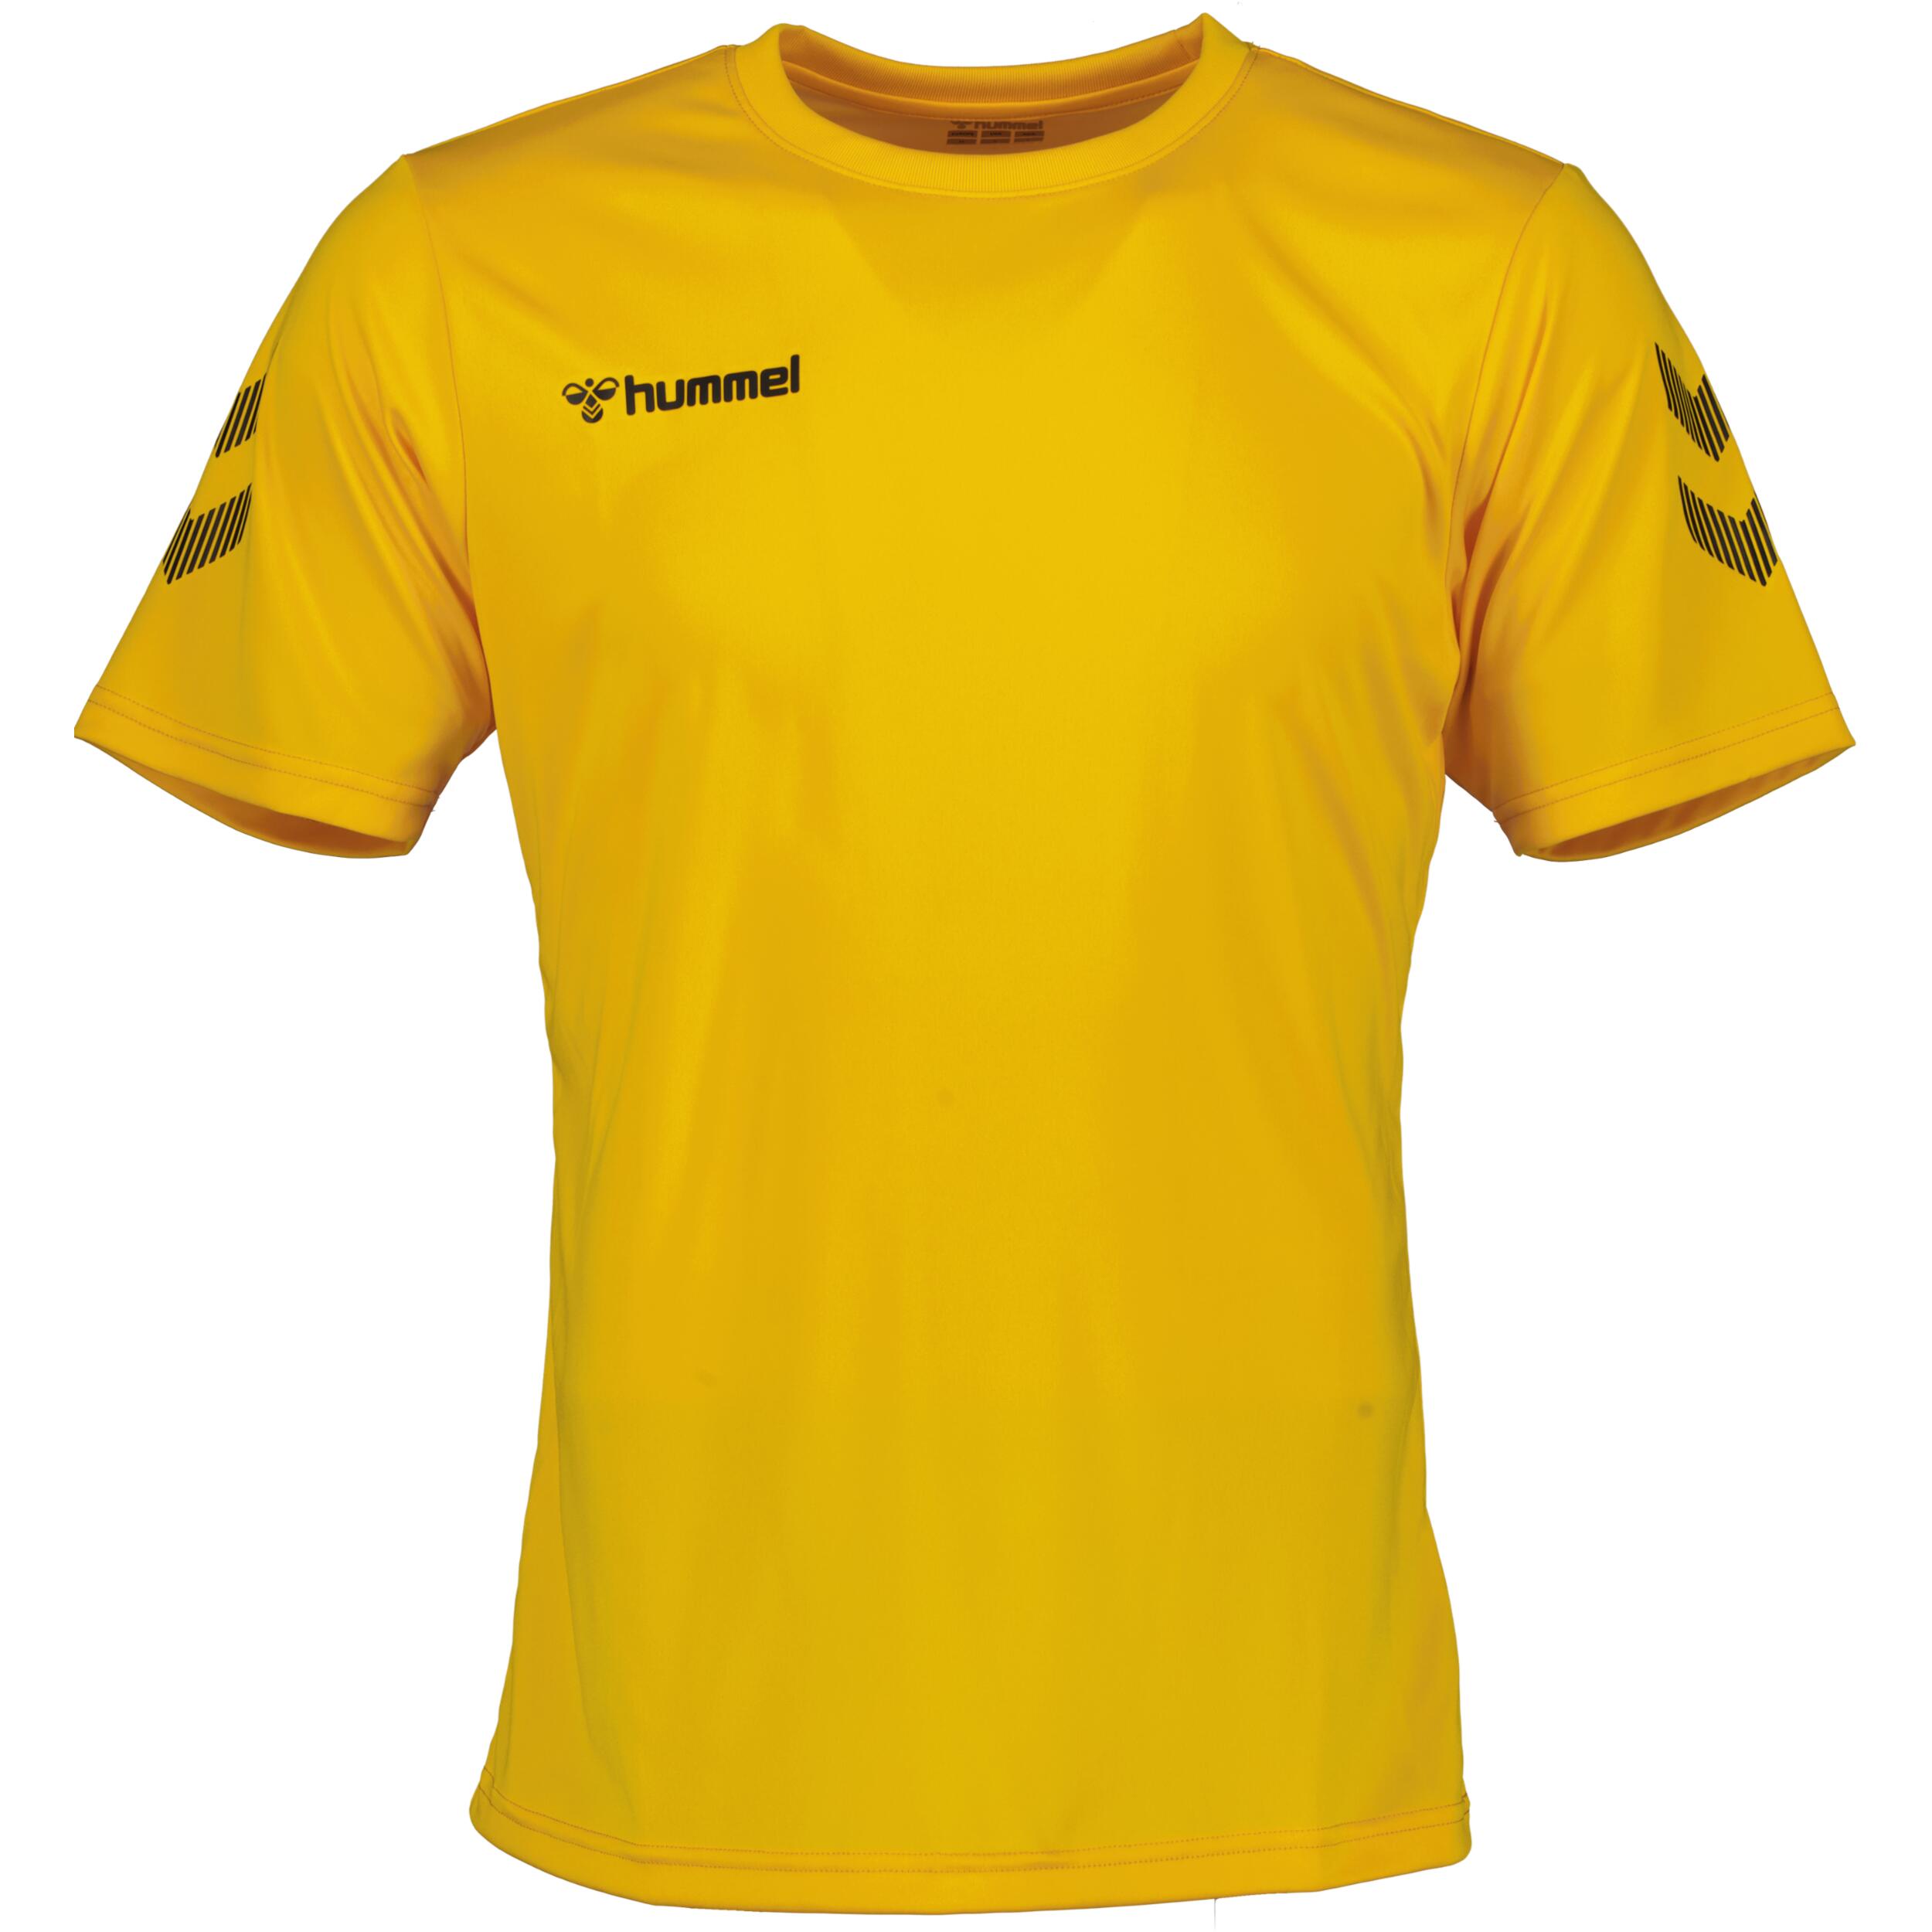 HUMMEL Solo jersey for kids, great for football, in sports yellow